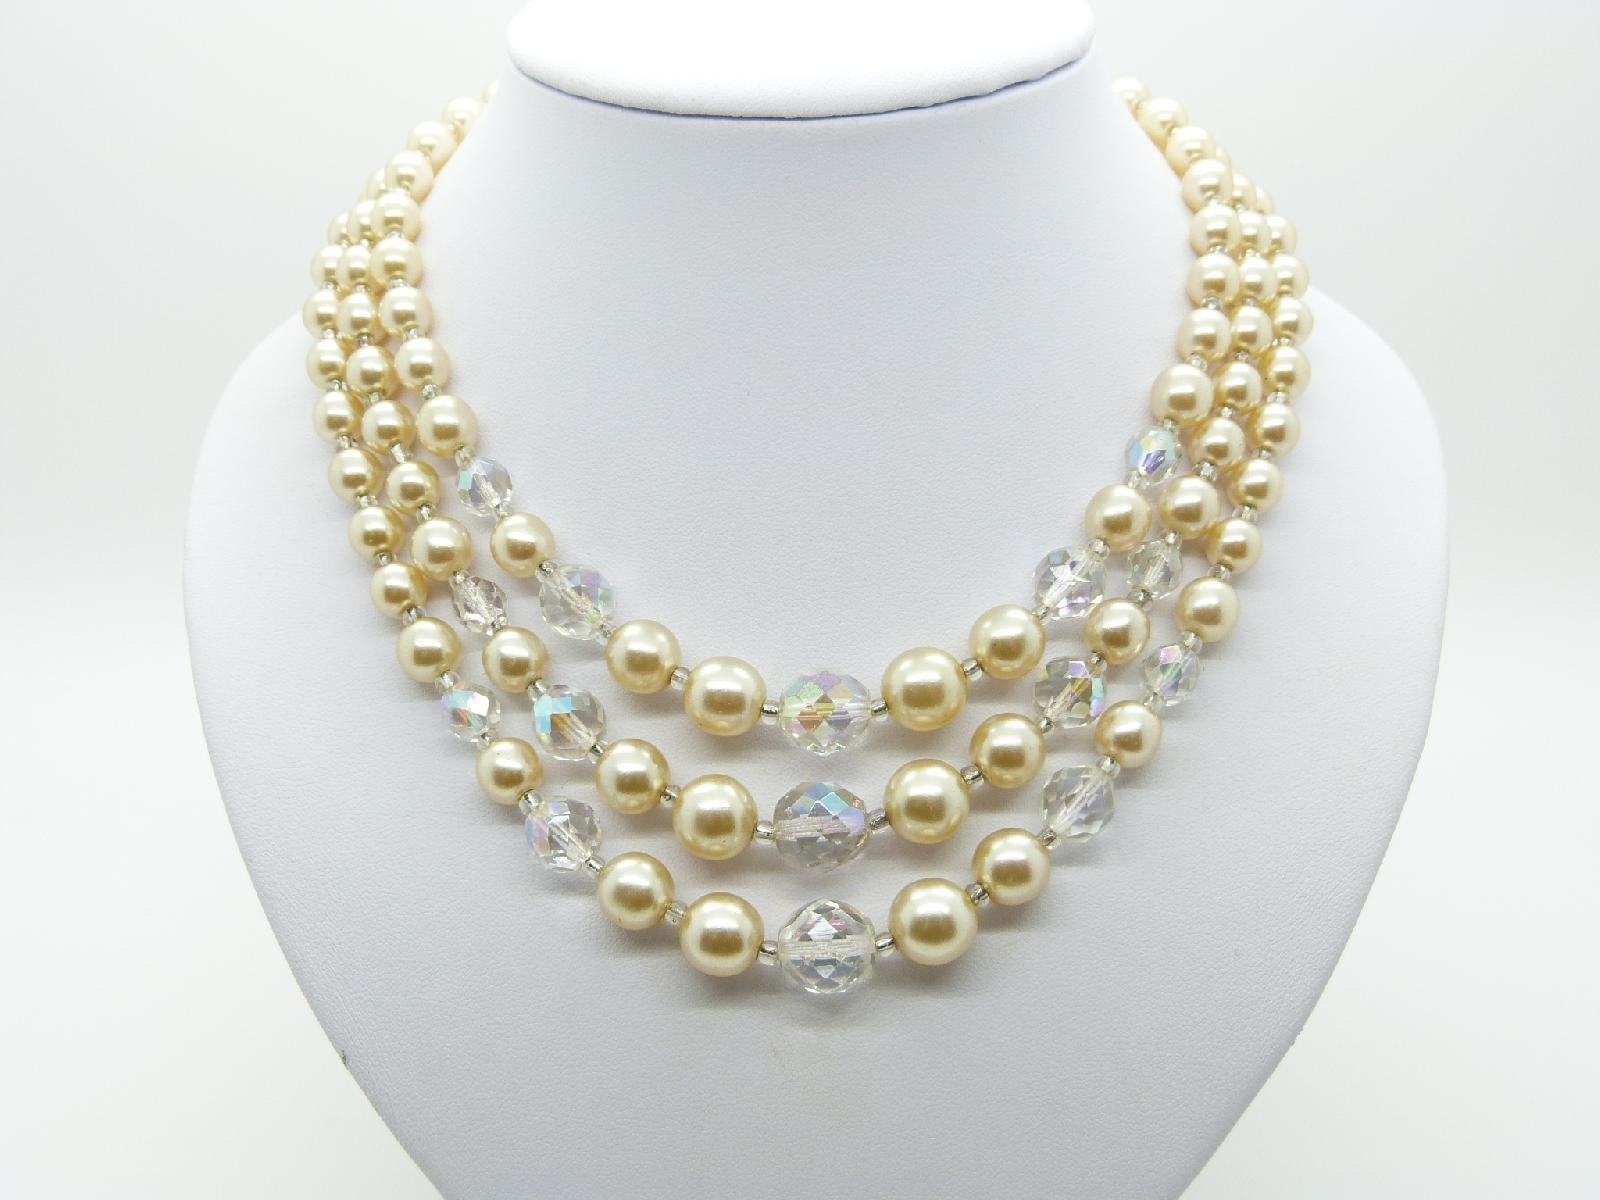 £25.00 - Vintage 50s Stunning Three Row Crystal and Faux Pearl Glass Bead Necklace